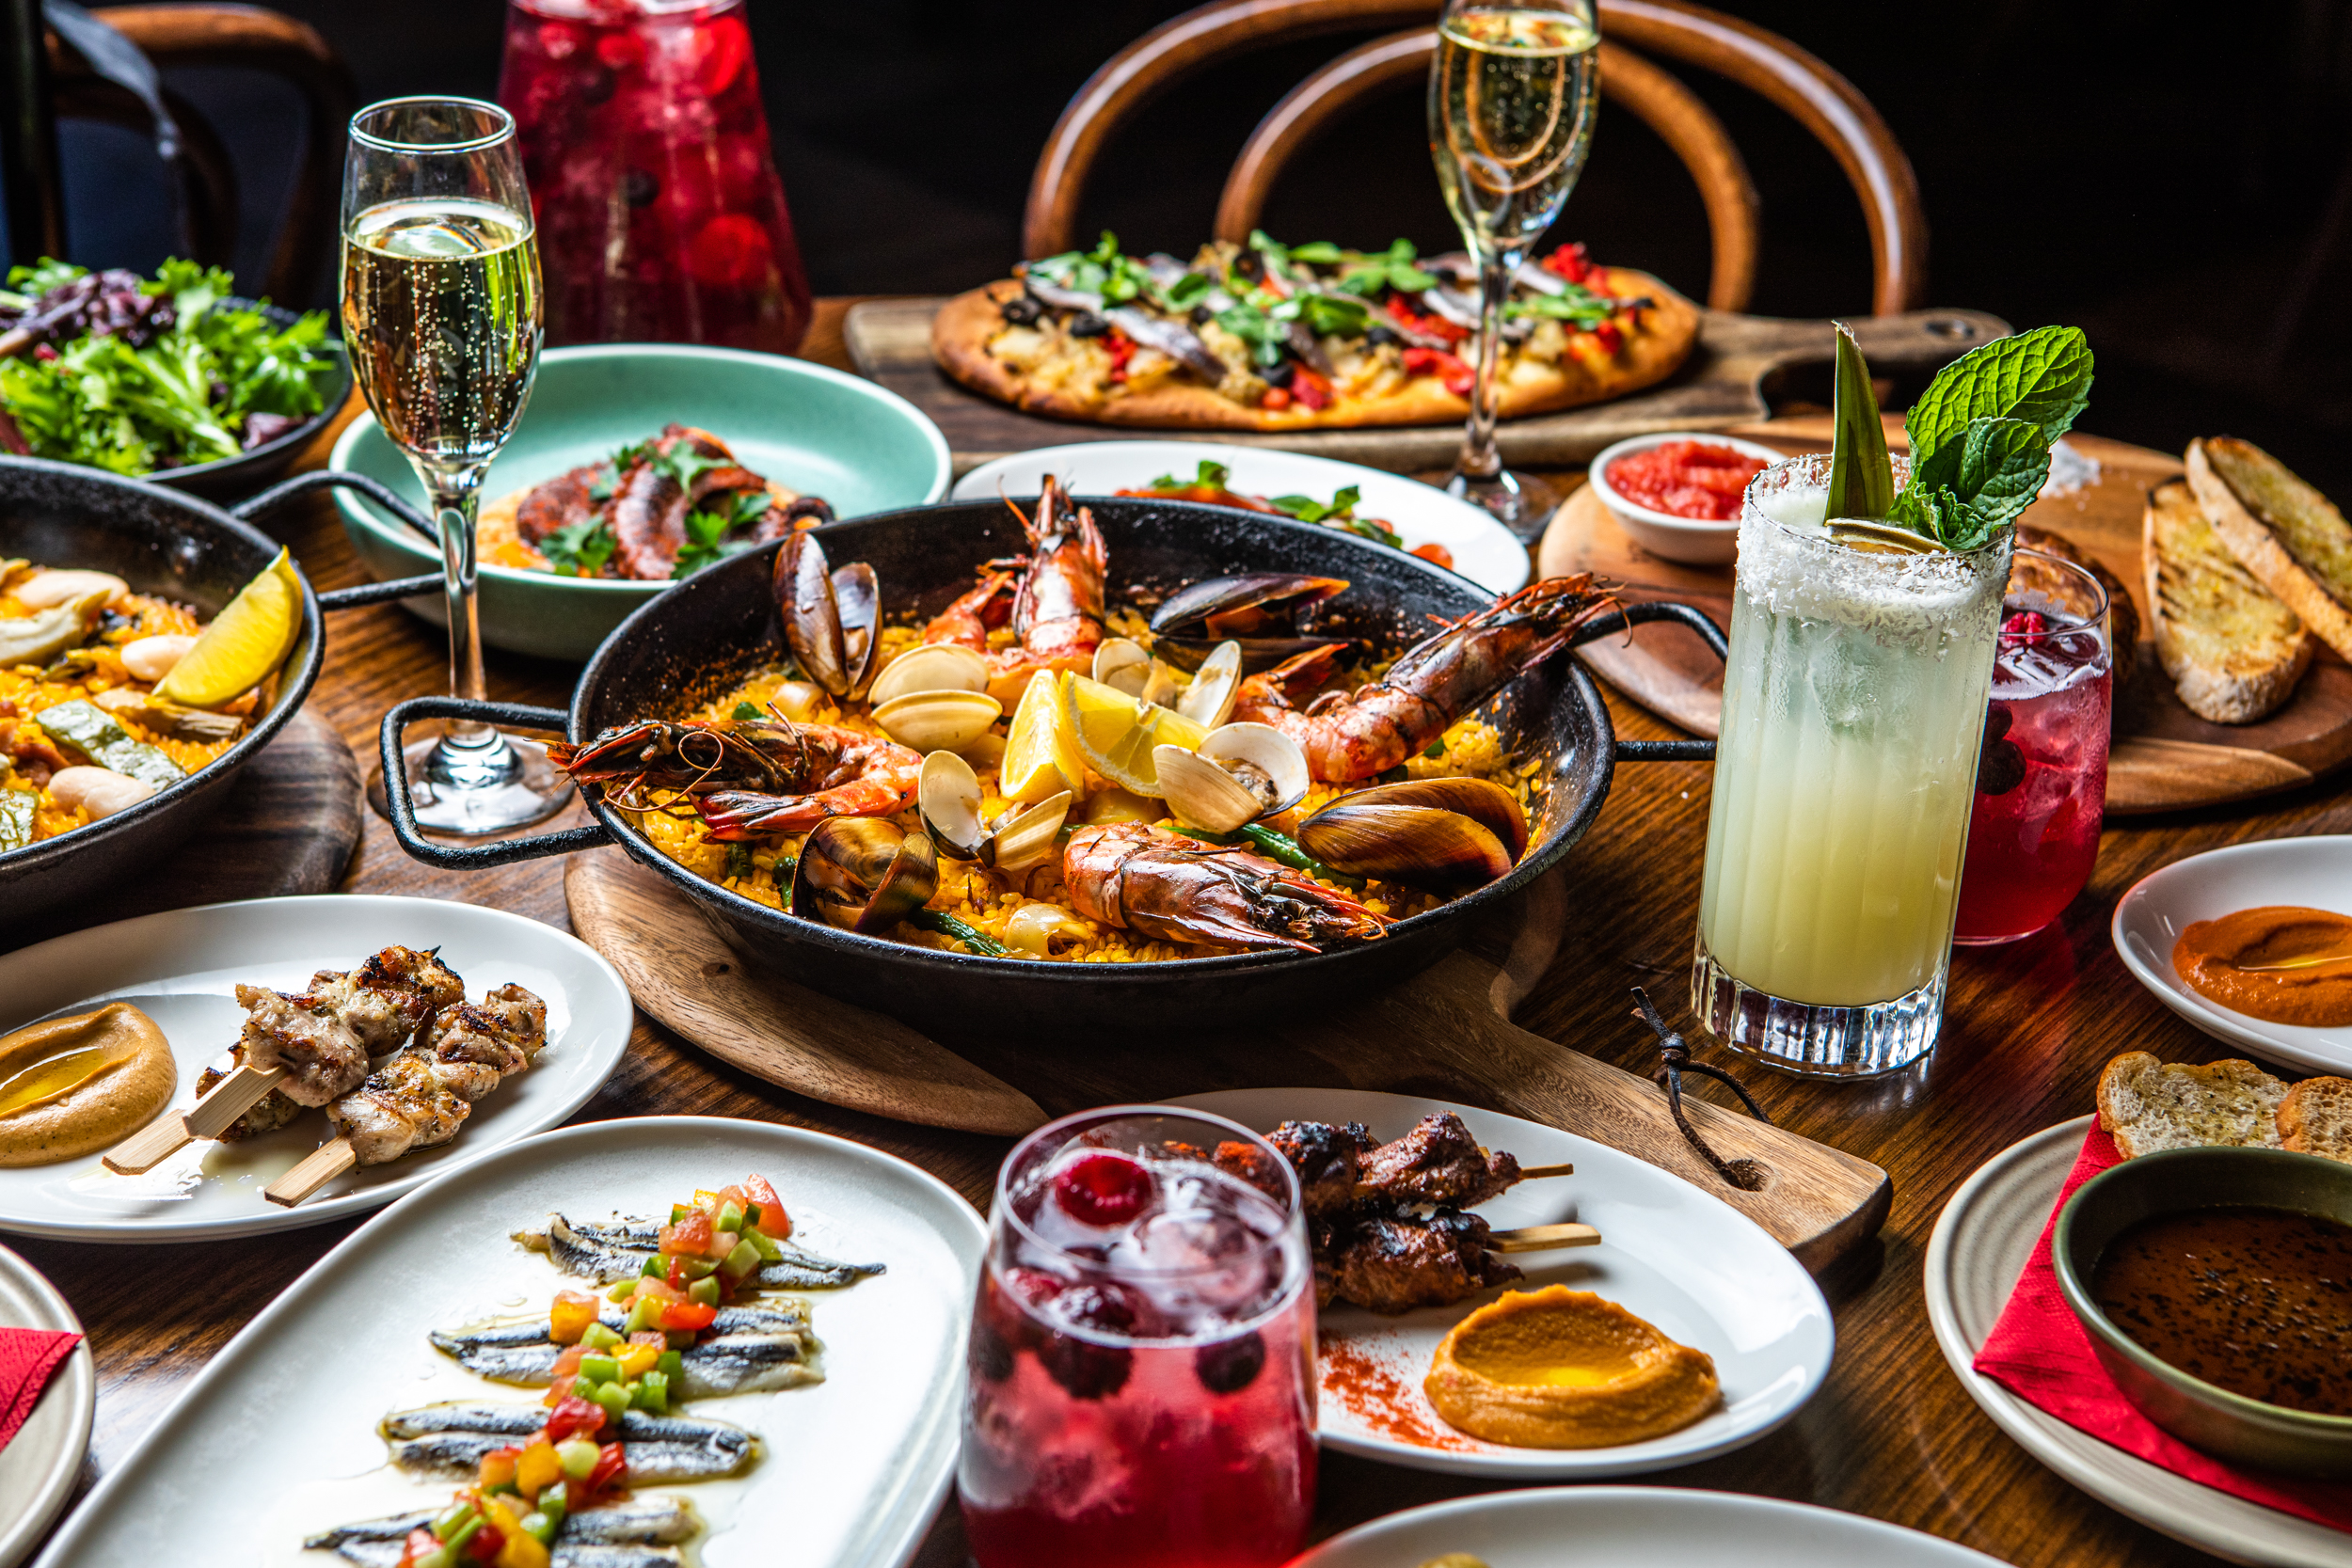 Calling All Tapas Lovers... You Need to Try This New Menu!